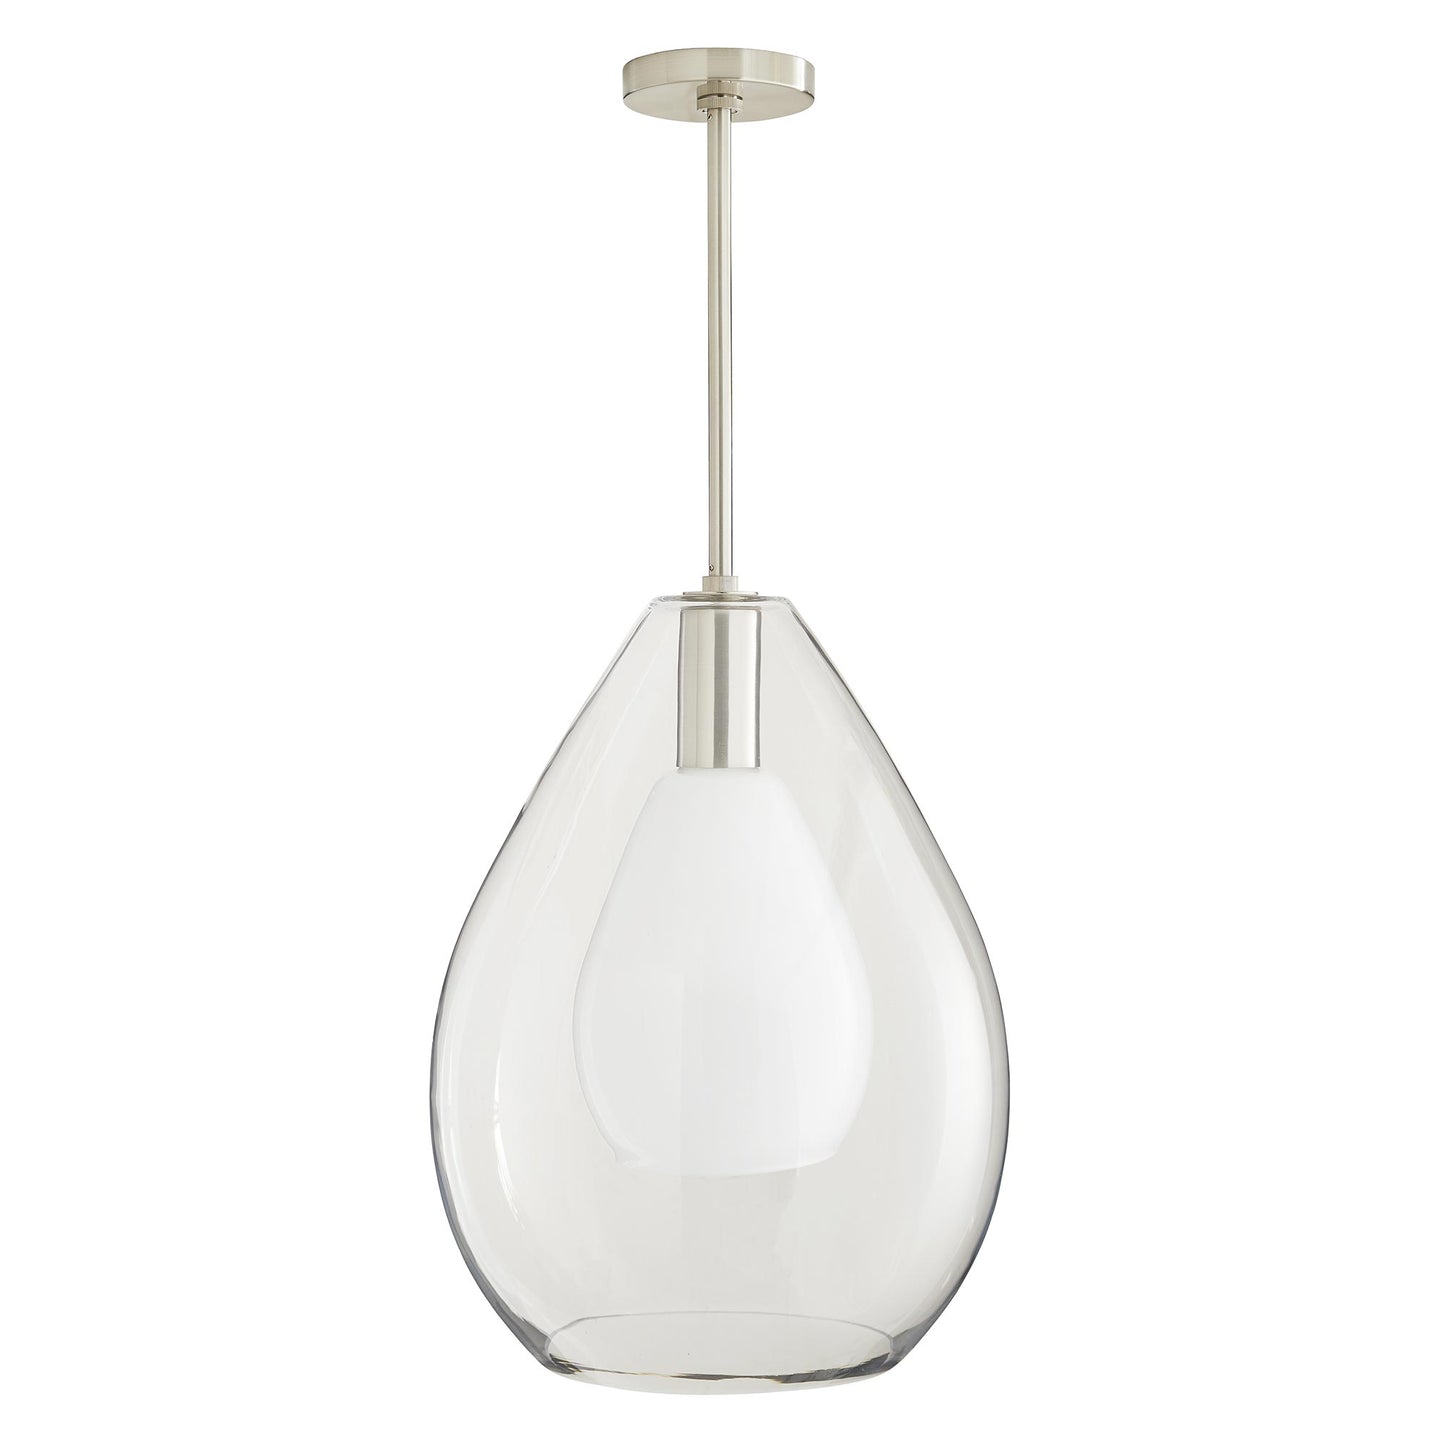 Load image into Gallery viewer, Nala Pendant - Brushed Nickel
